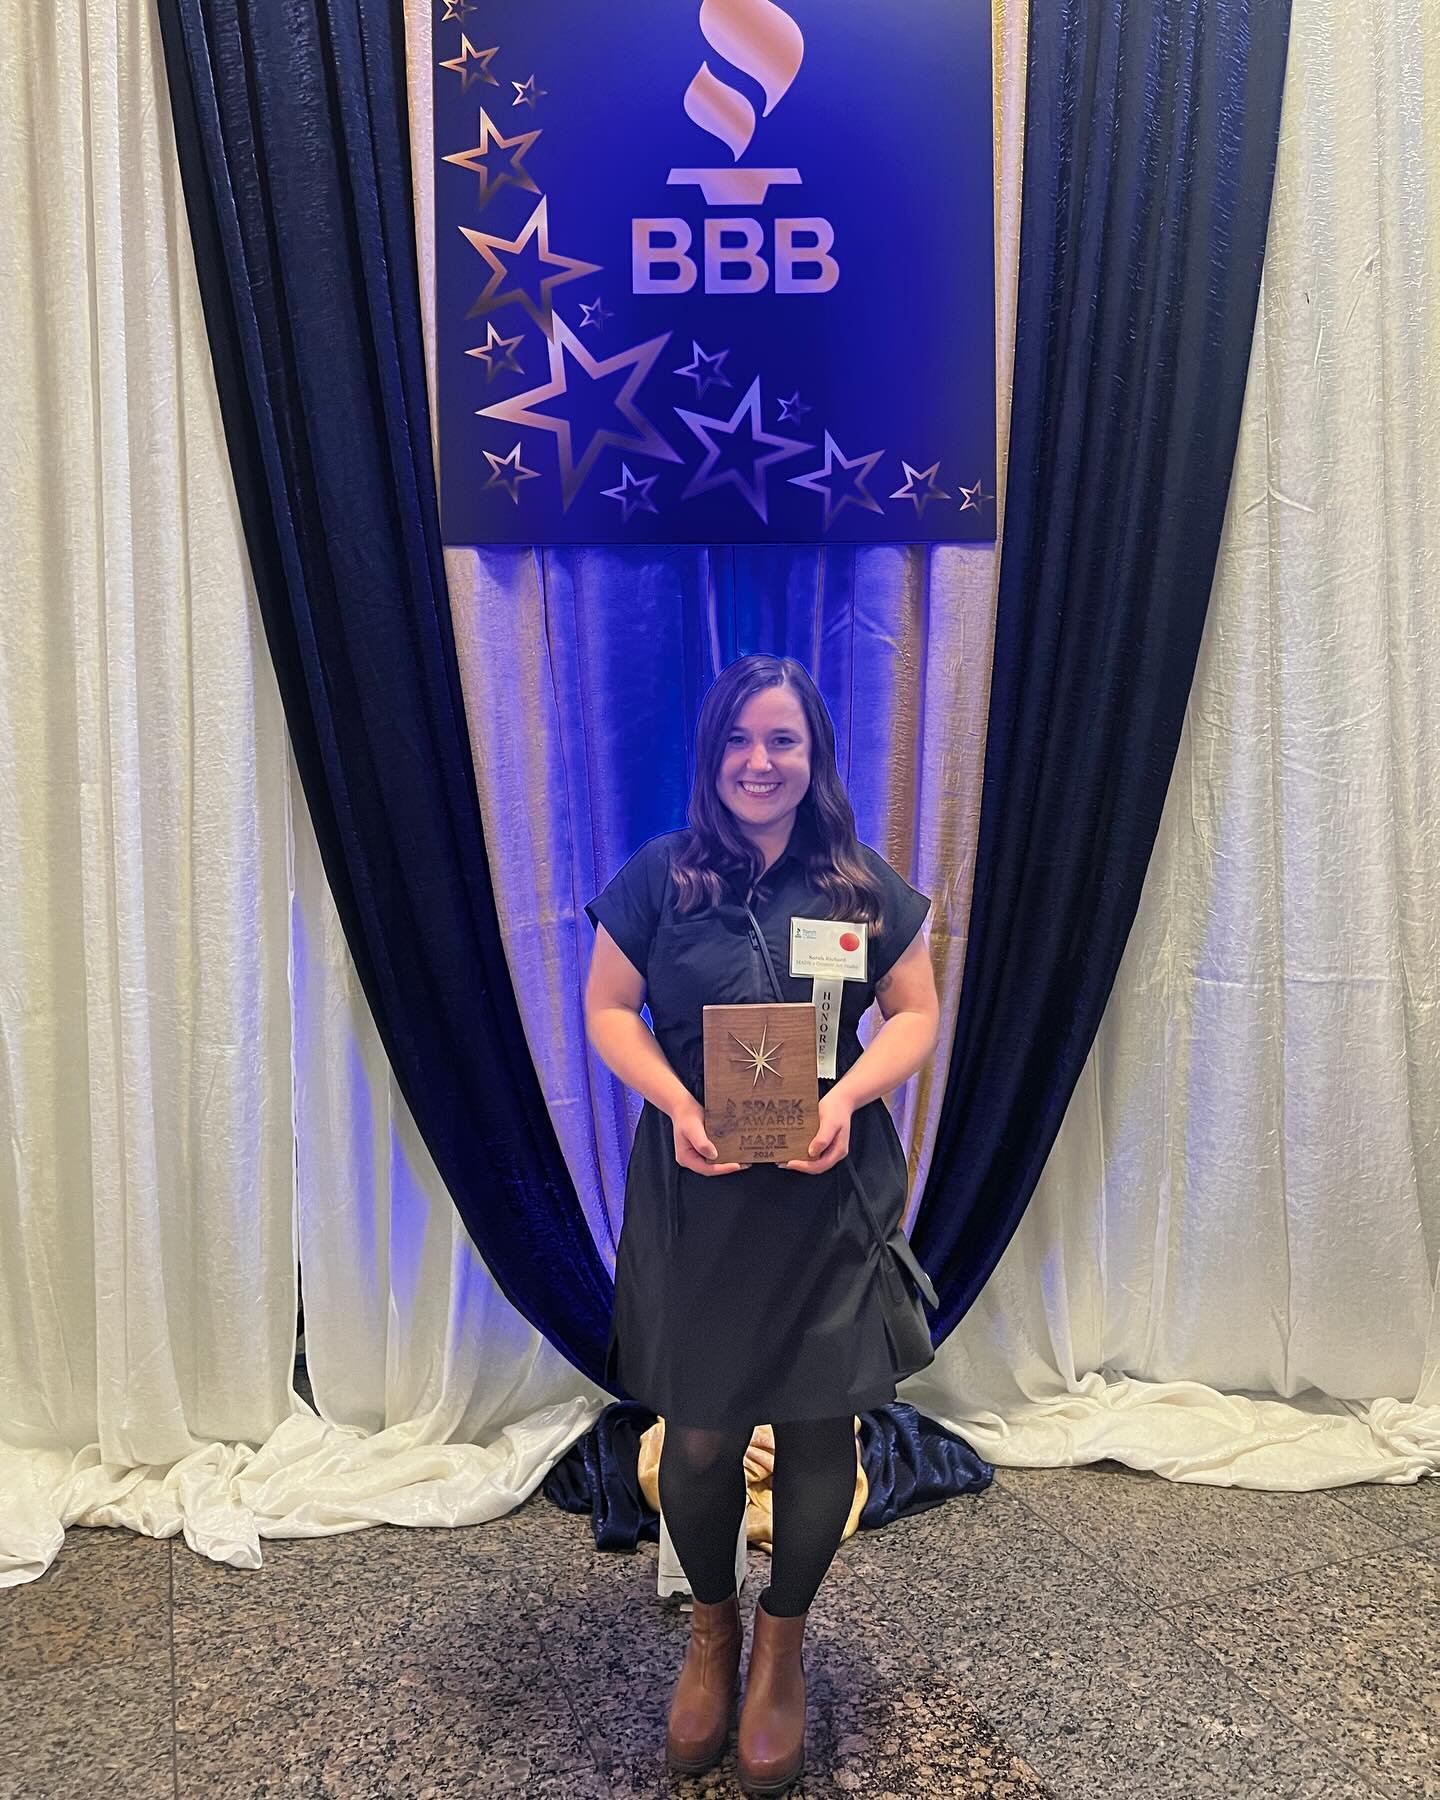 It's truly an honor to accept the Dayton Spark Award presented by the @daytonbbb! 

Every day, we strive to provide a platform for creativity and skill-building in our community. Your continued support fuels our dedication, and we're excited to keep 